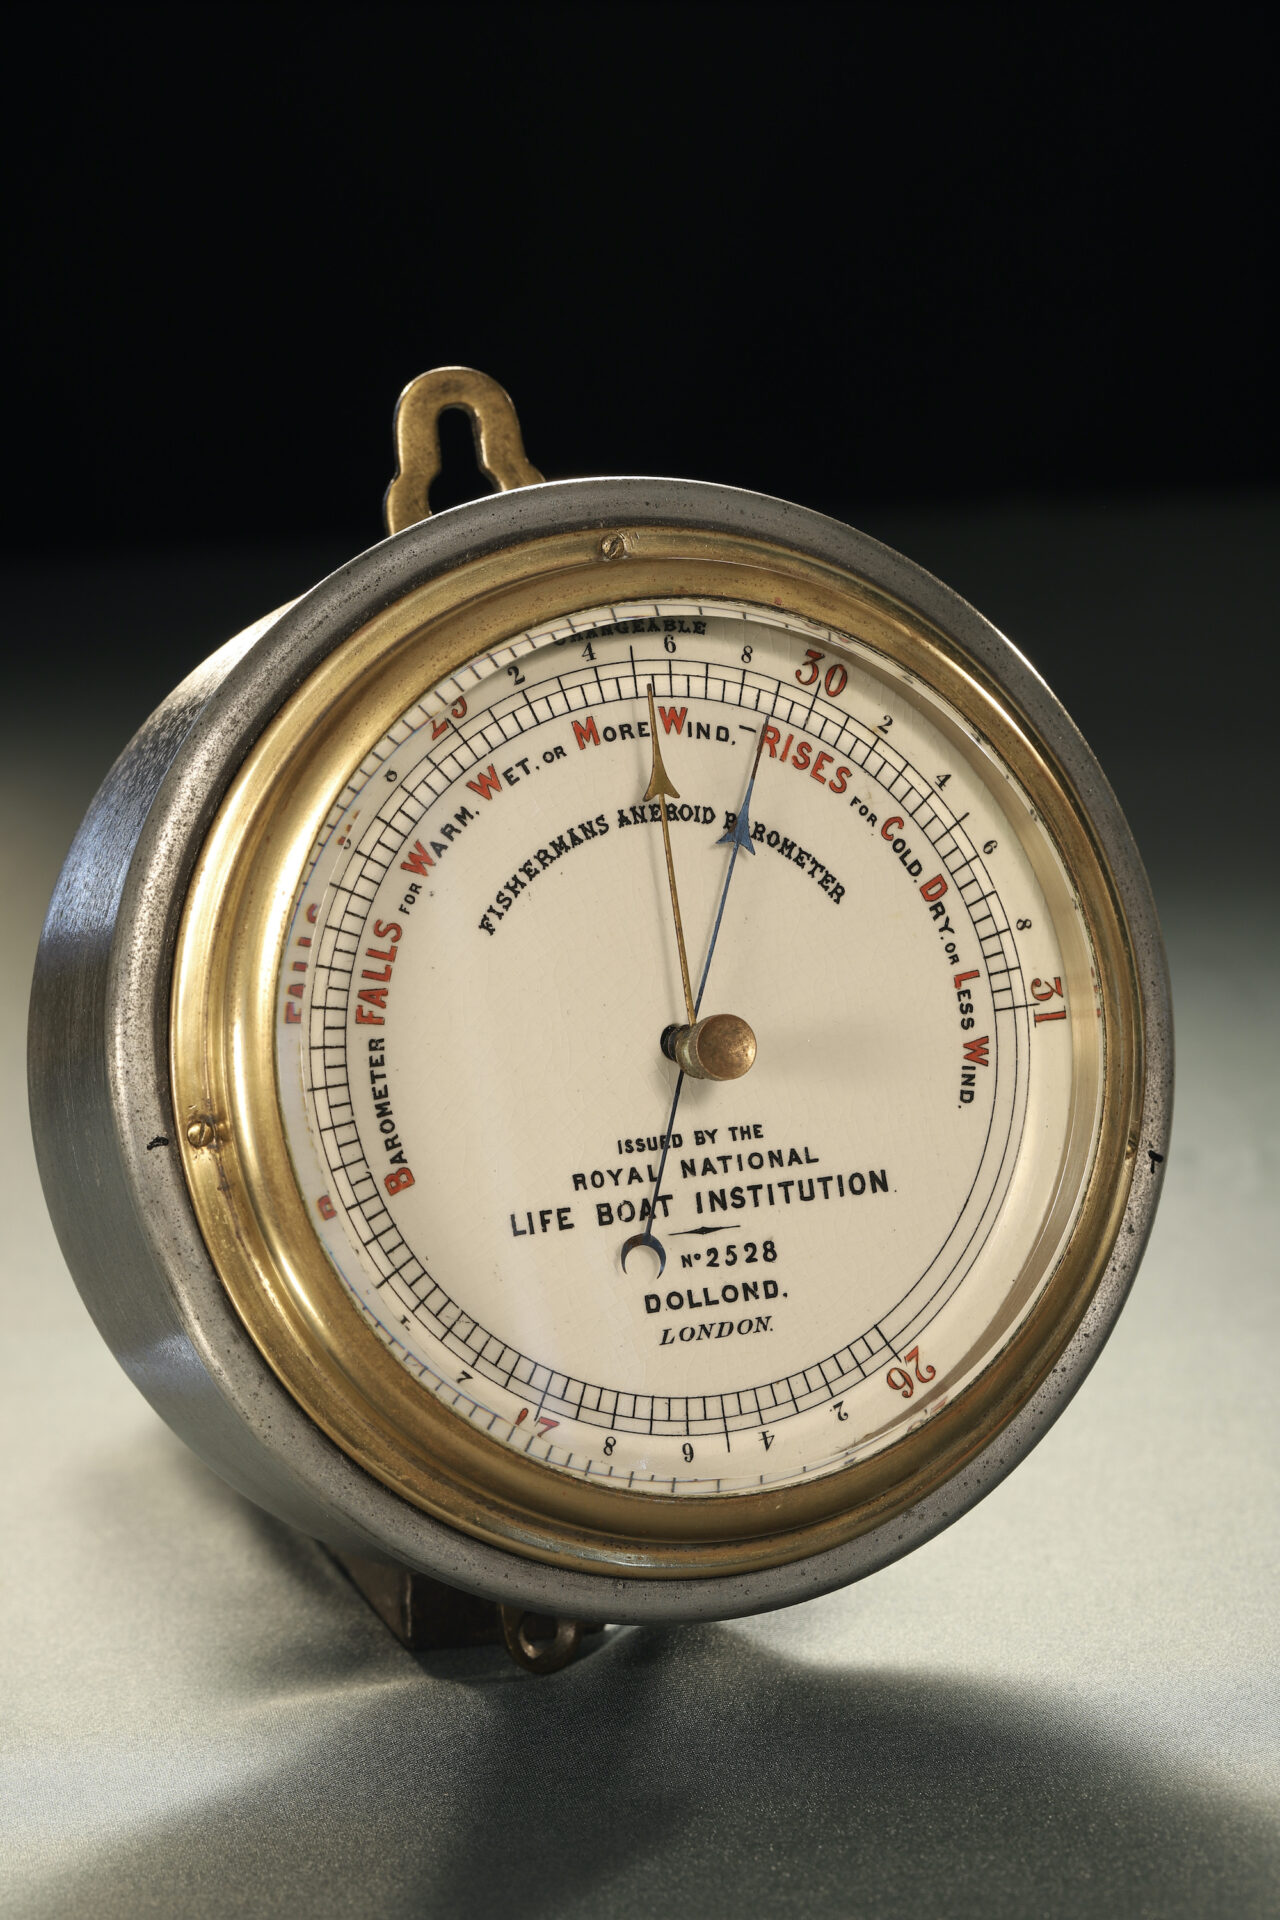 Image of Dollond RNLI Barometer No 2528 taken from lefthand side